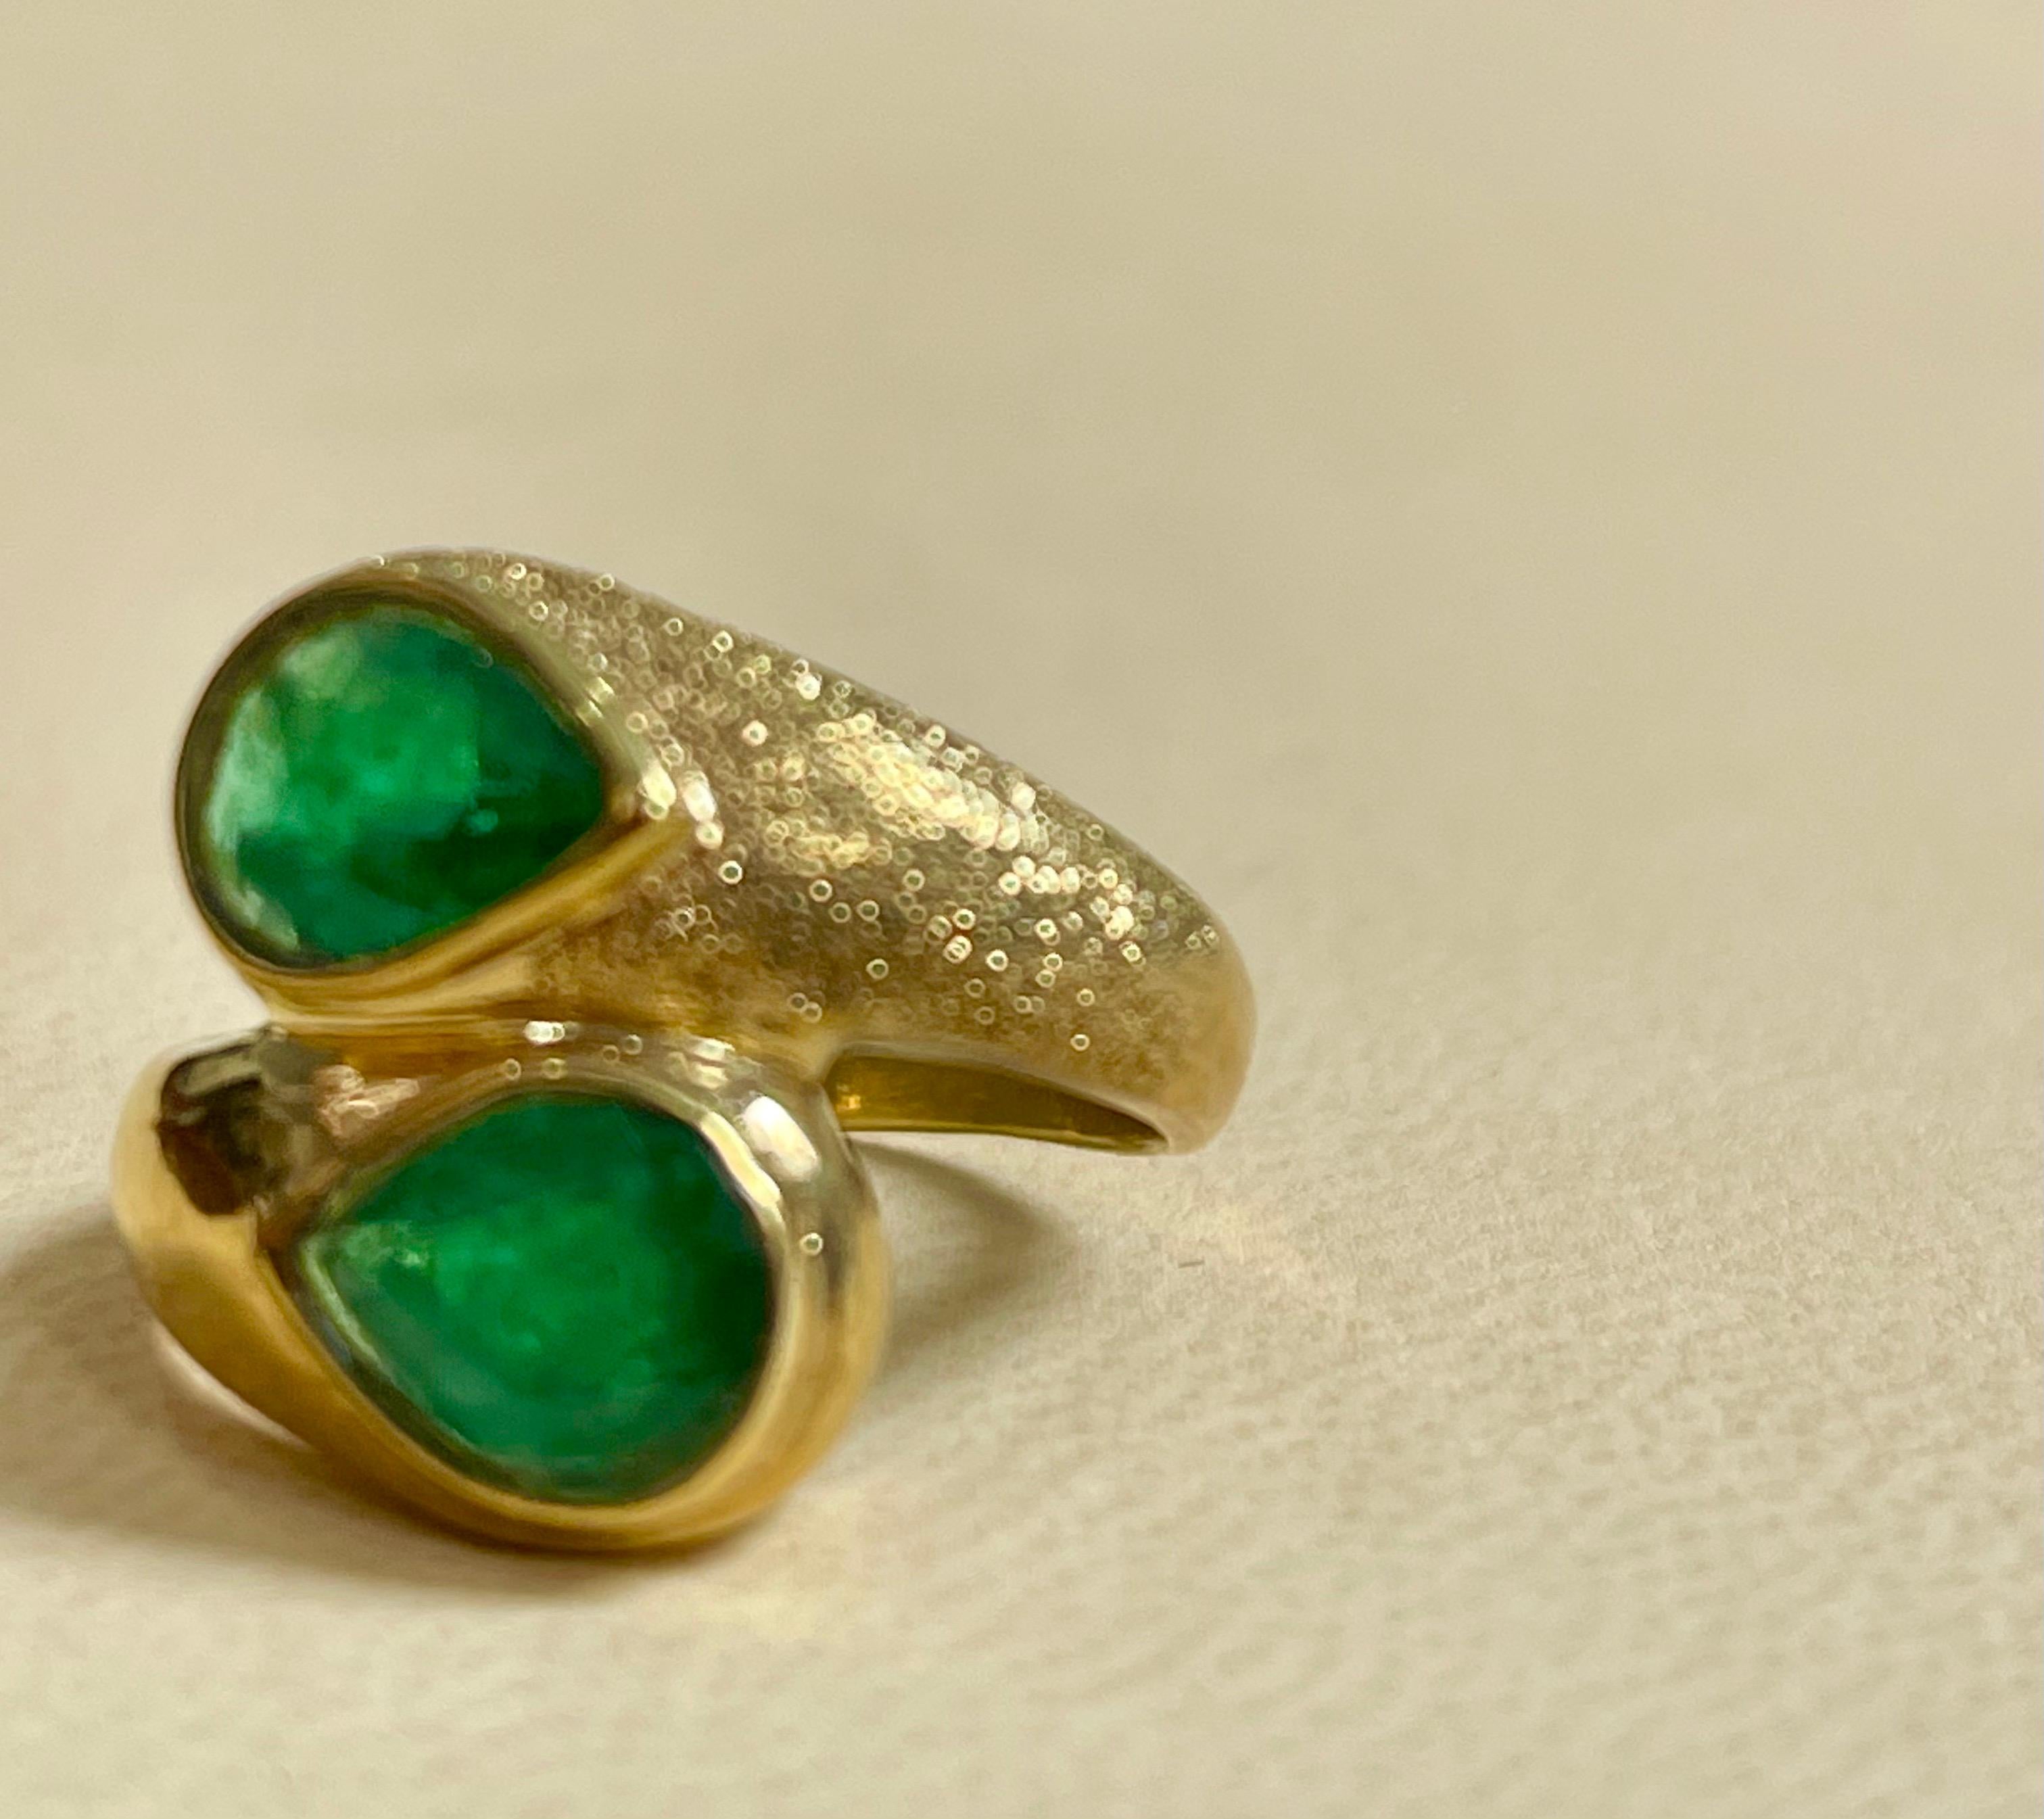 A classic, Cocktail ring 
2 Pear shape  Emerald   Ring 14 Karat Yellow Gold Size 7

Intense green color, Beautiful stone with shine and luster  but has small  inclusions as all natural emeralds have inclusions.  
They have black dots called